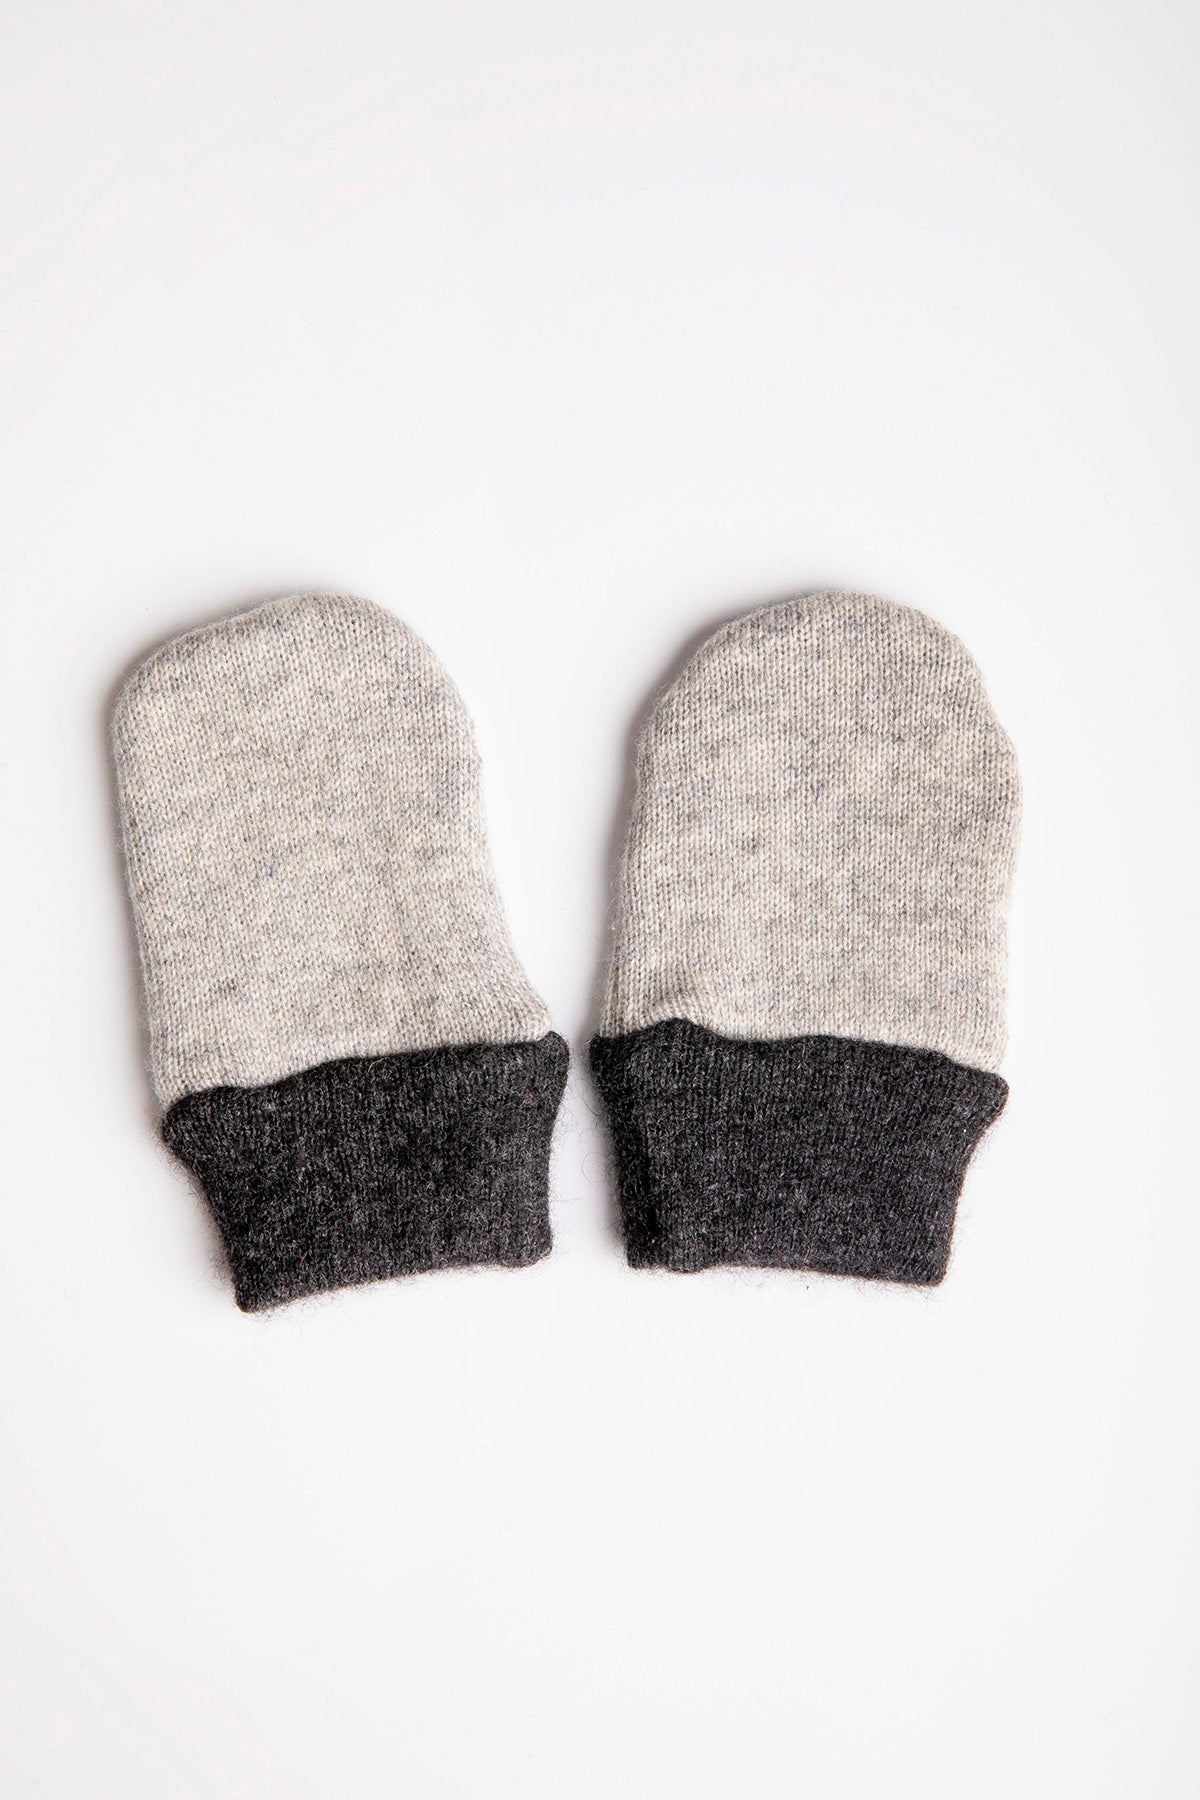 Gray Baby Set - Mittens, Booties and Hat